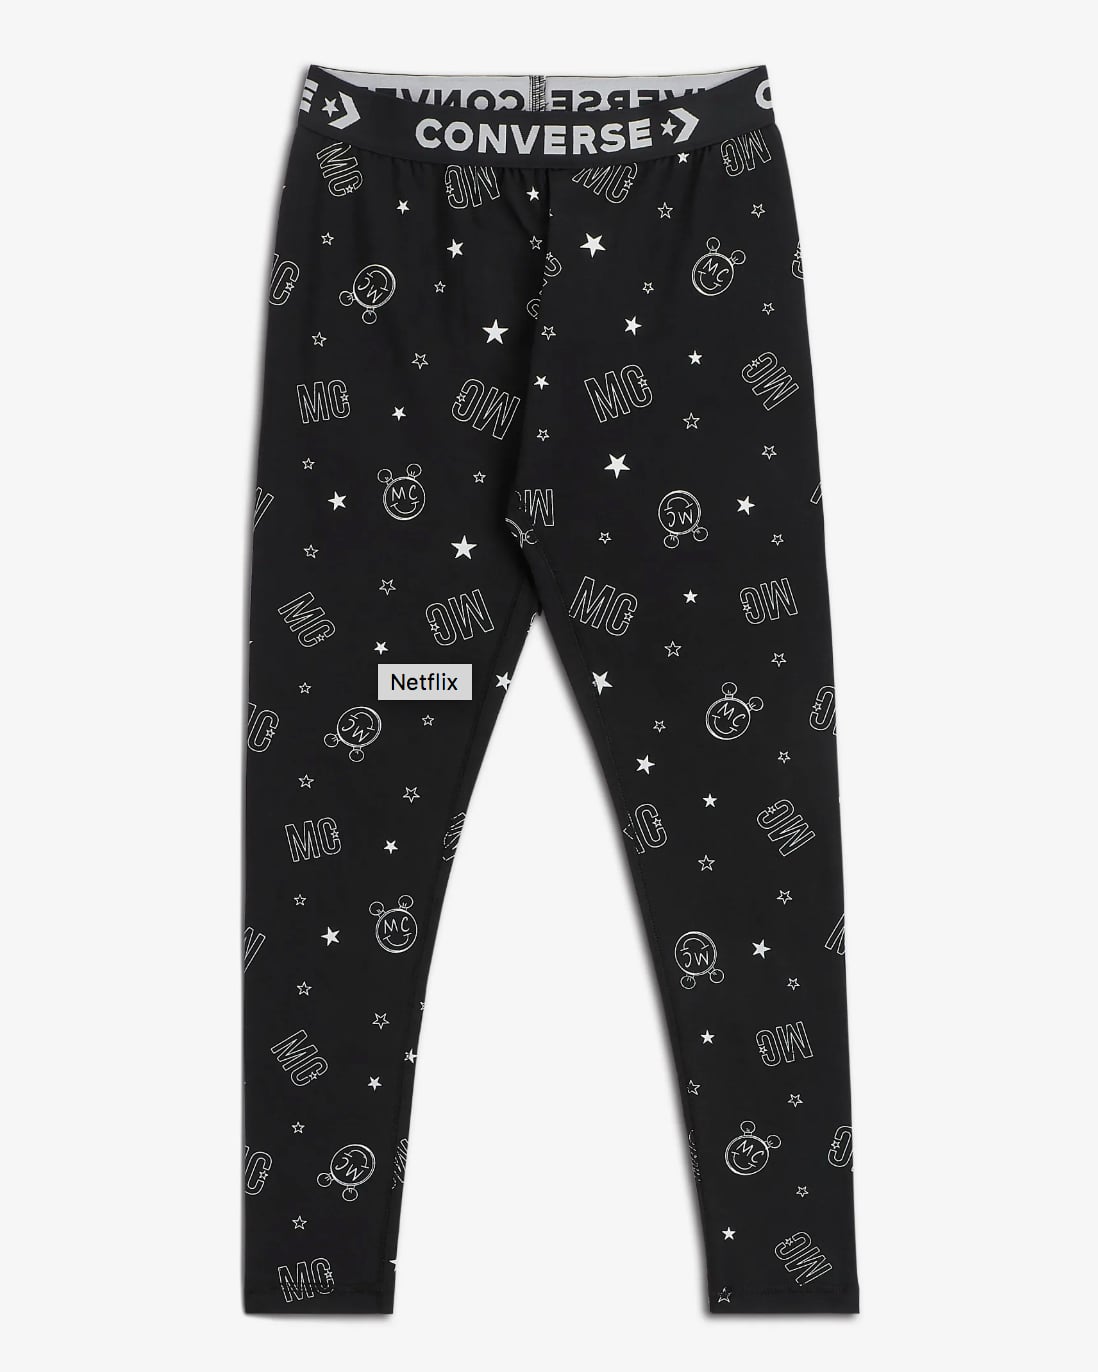 Converse x Miley Cyrus Monogram Women's Leggings ($45), Miley Cyrus  Created the Perfect Holiday Sneakers, and They Have Us Believing in Santa